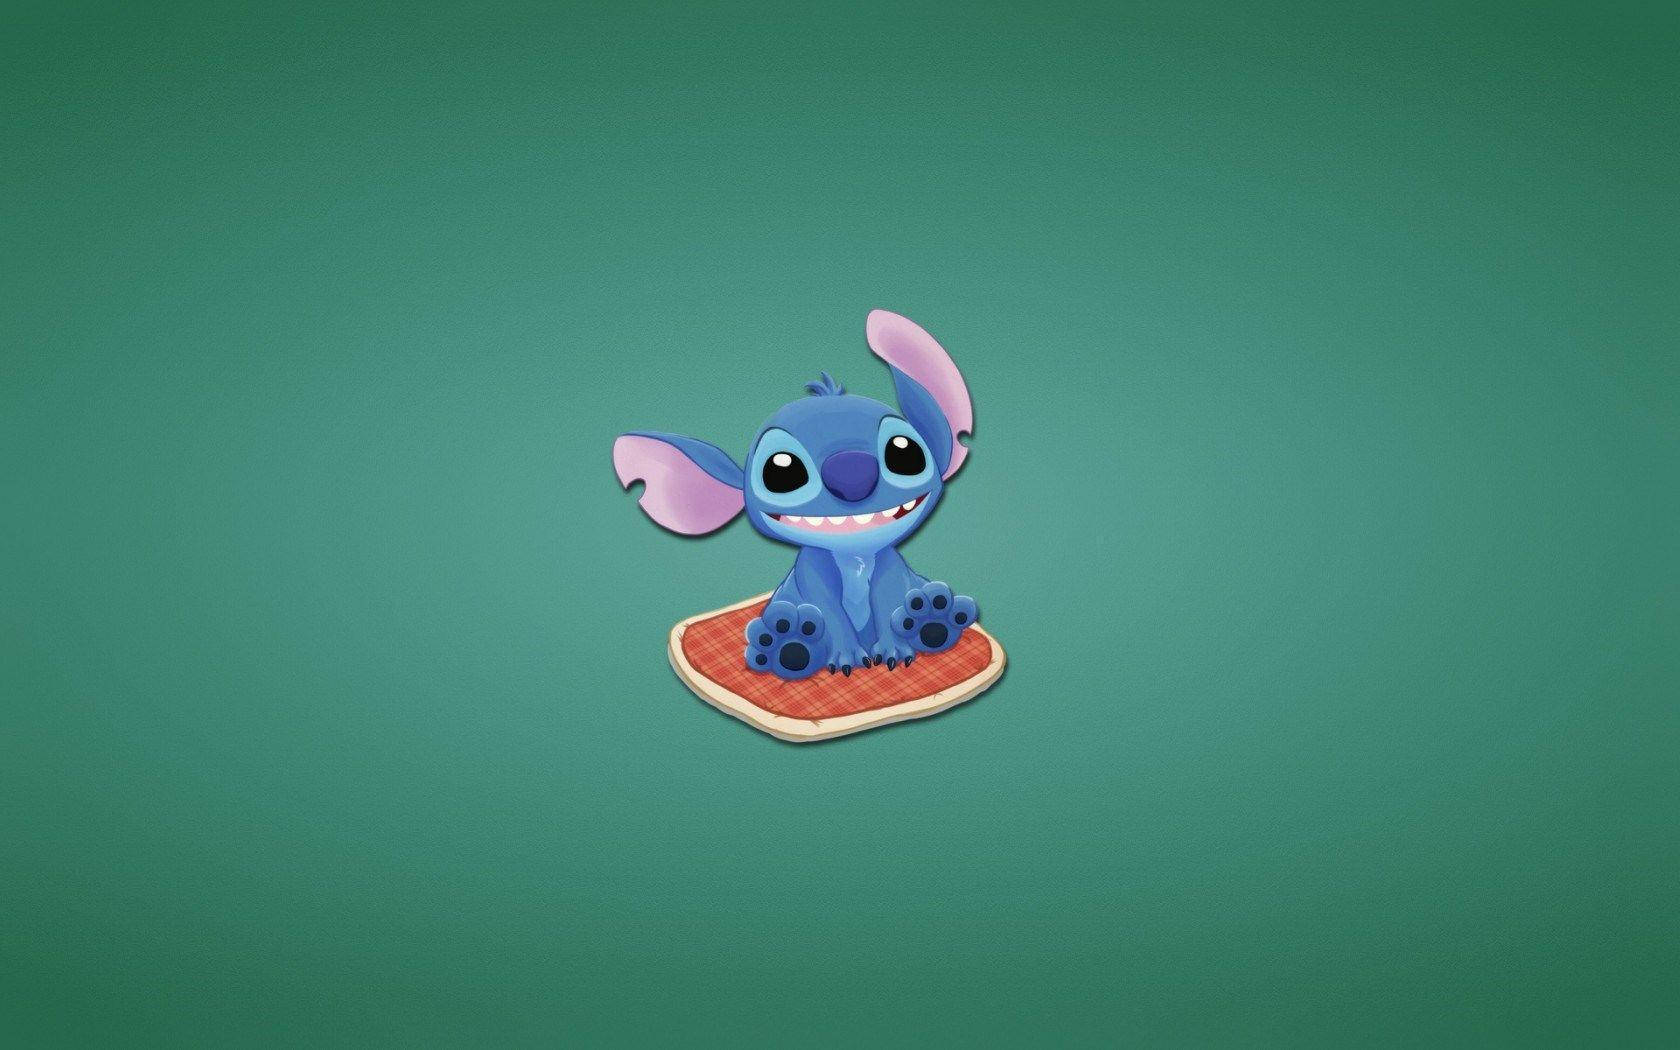 Stitch 3d Style Drawing On Mat Background